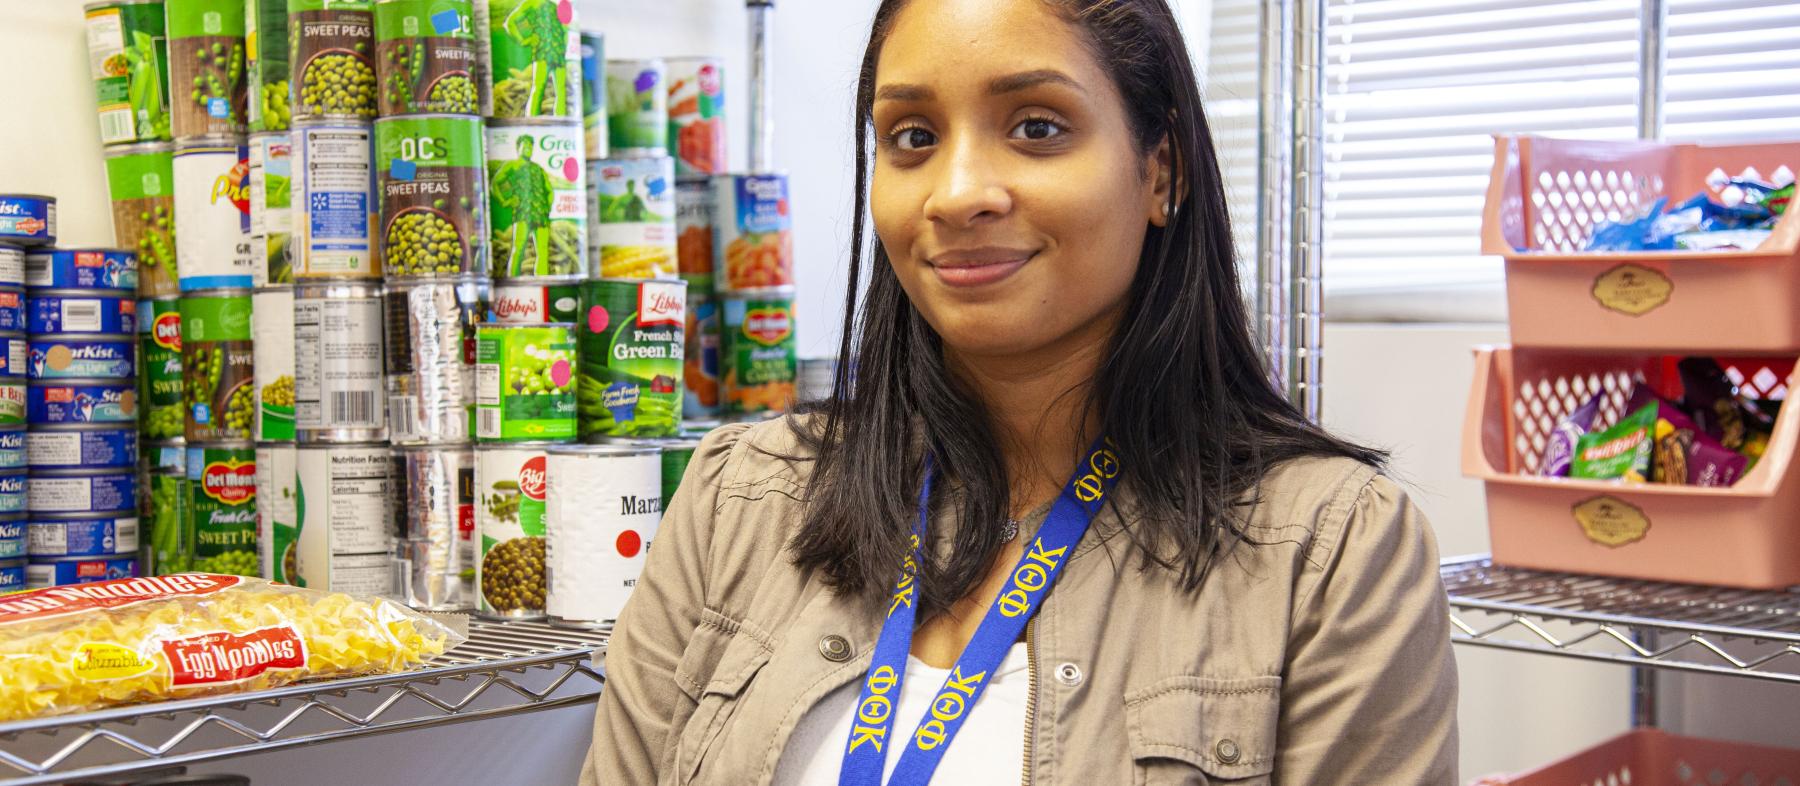 A woman stands next to shelves in the food pantry